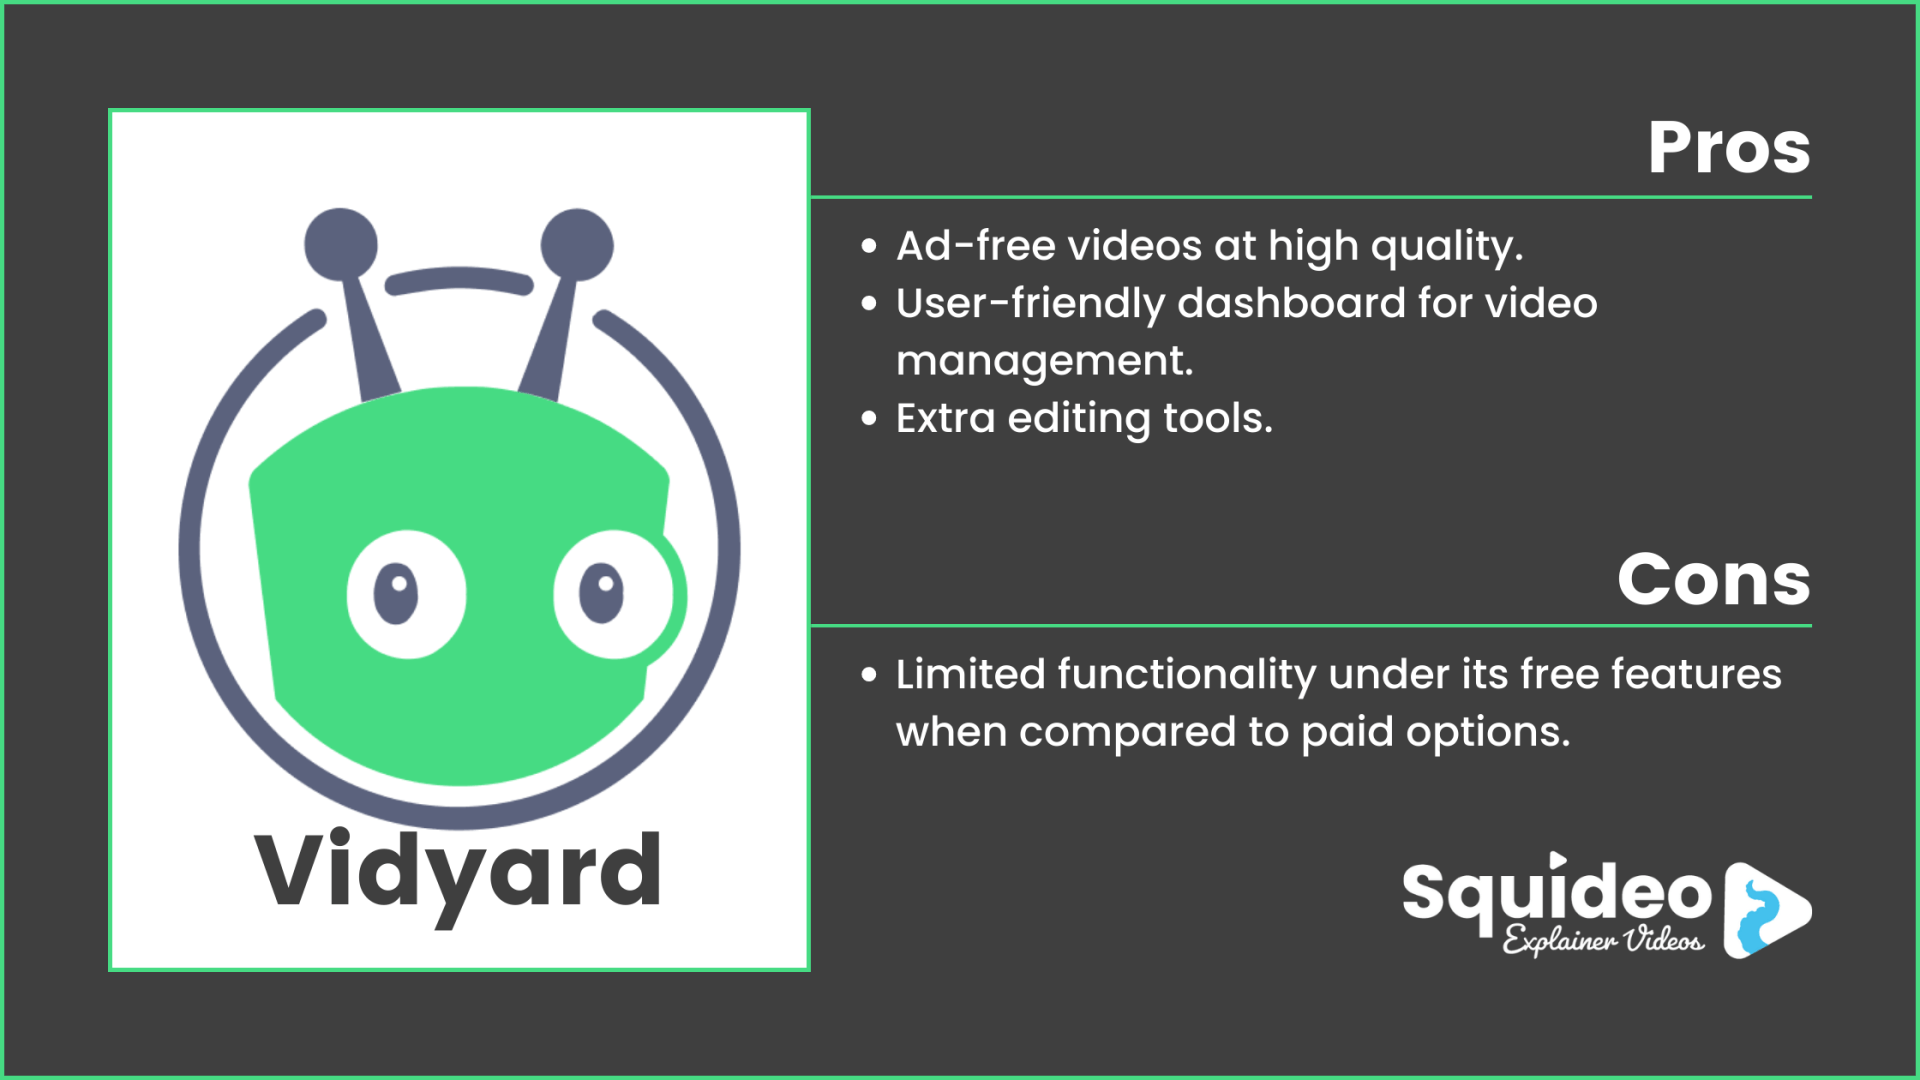 Vidyard Video Pros and Cons